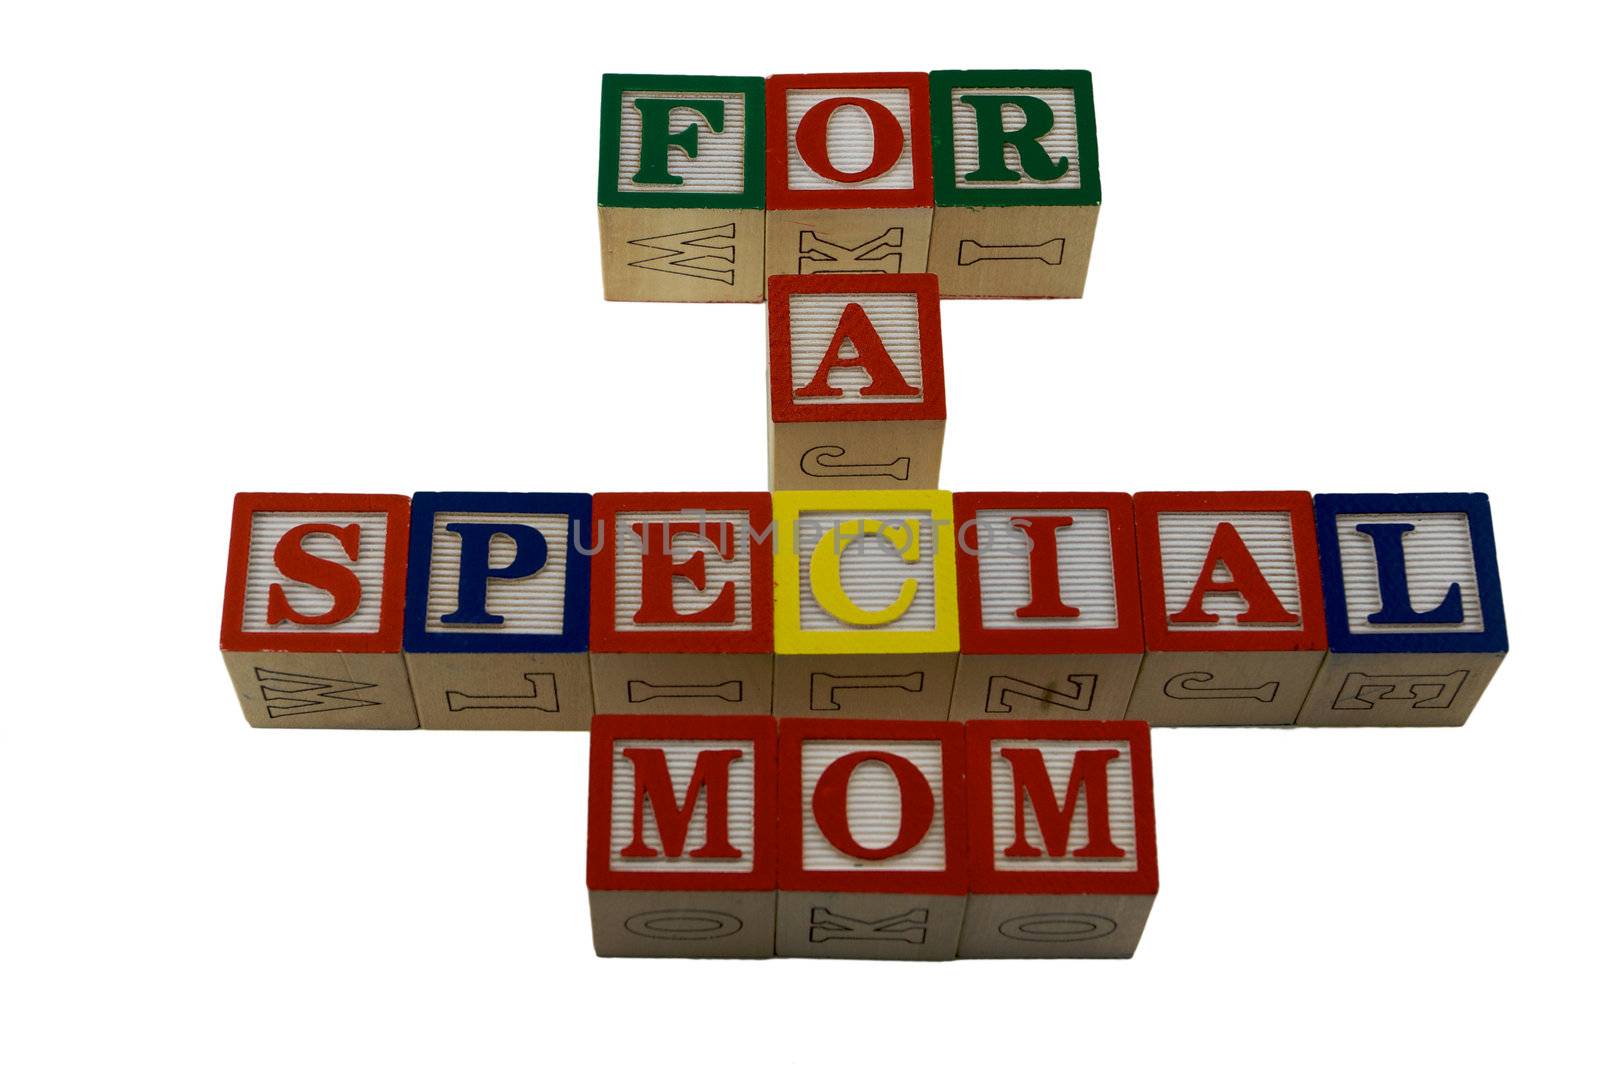 For a special mothers day in alpabet blocks by bobkeenan